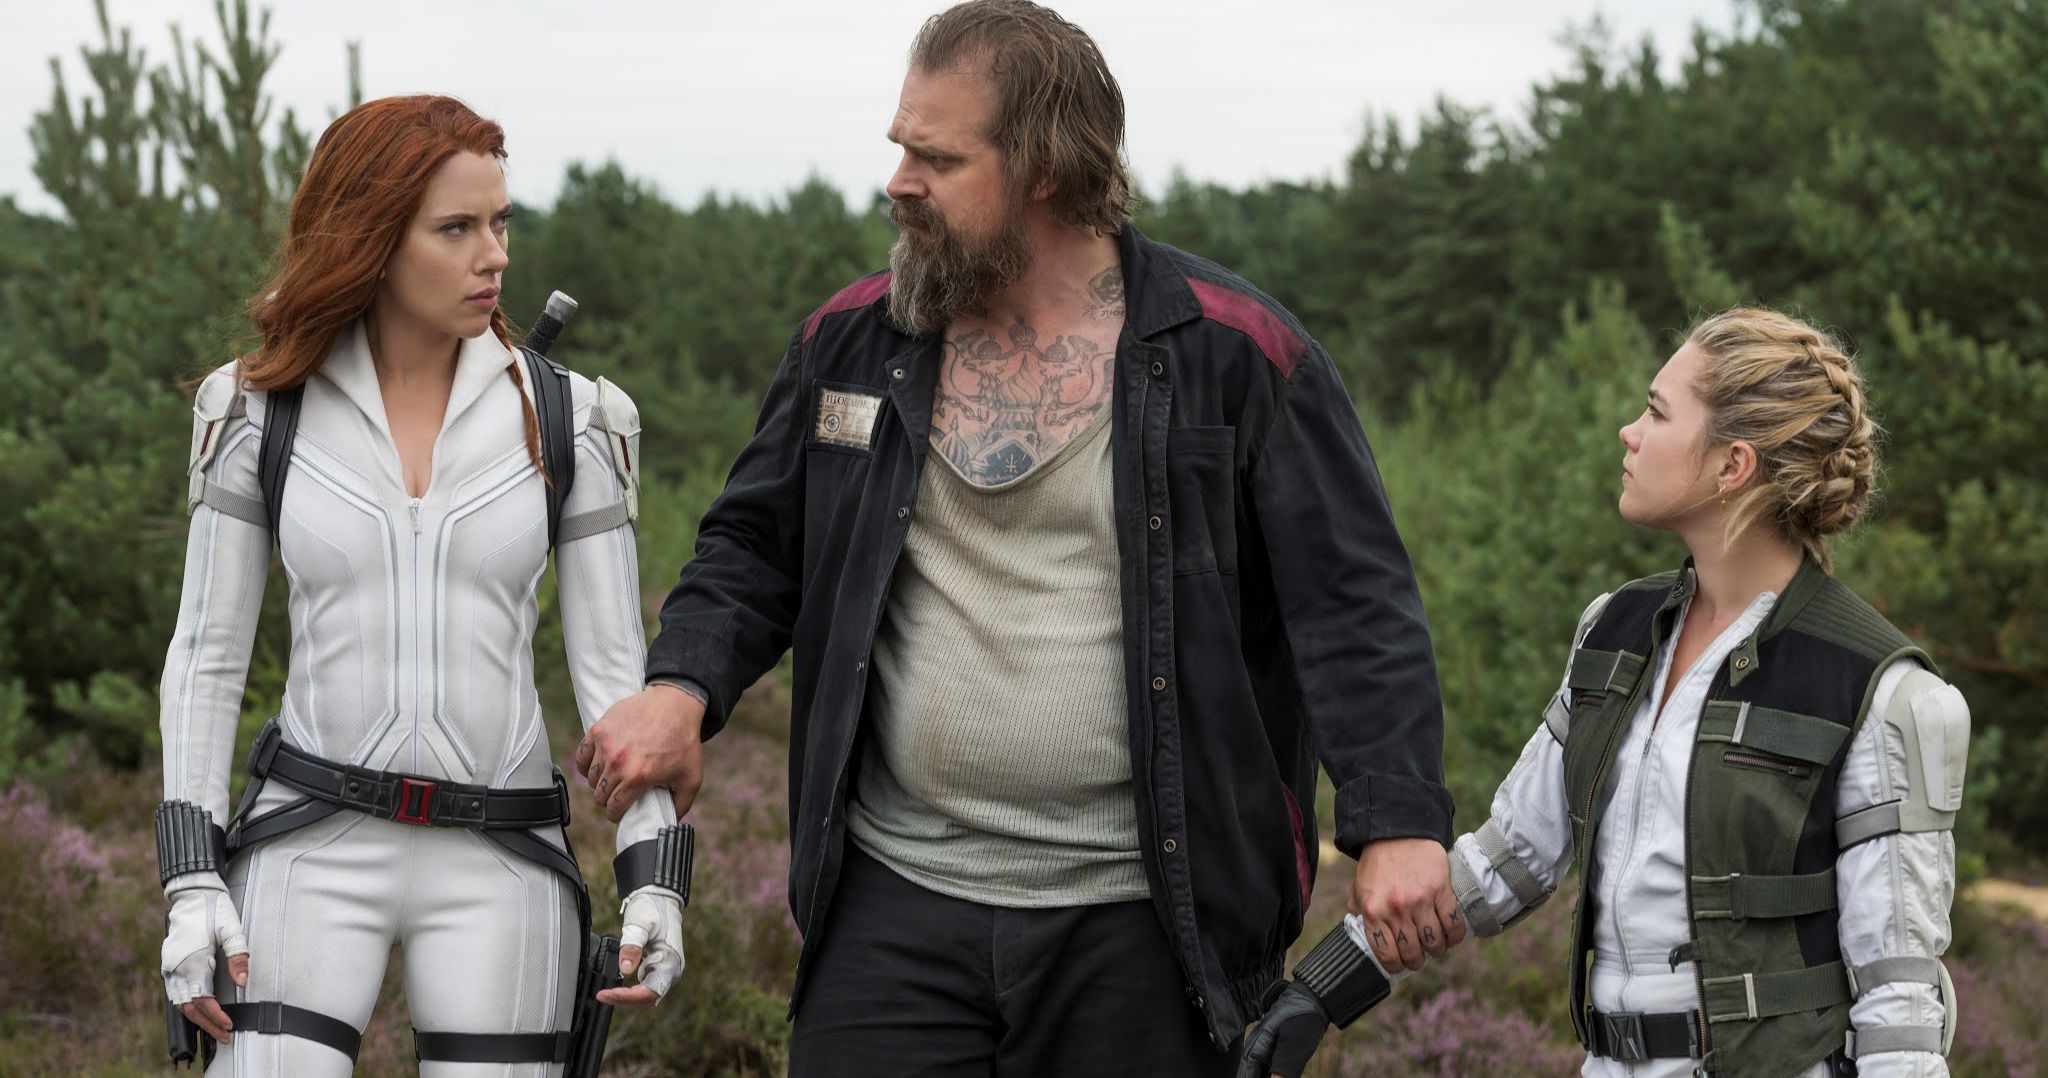 The Wonder' review: Florence Pugh commands the screen in clash of science  and faith